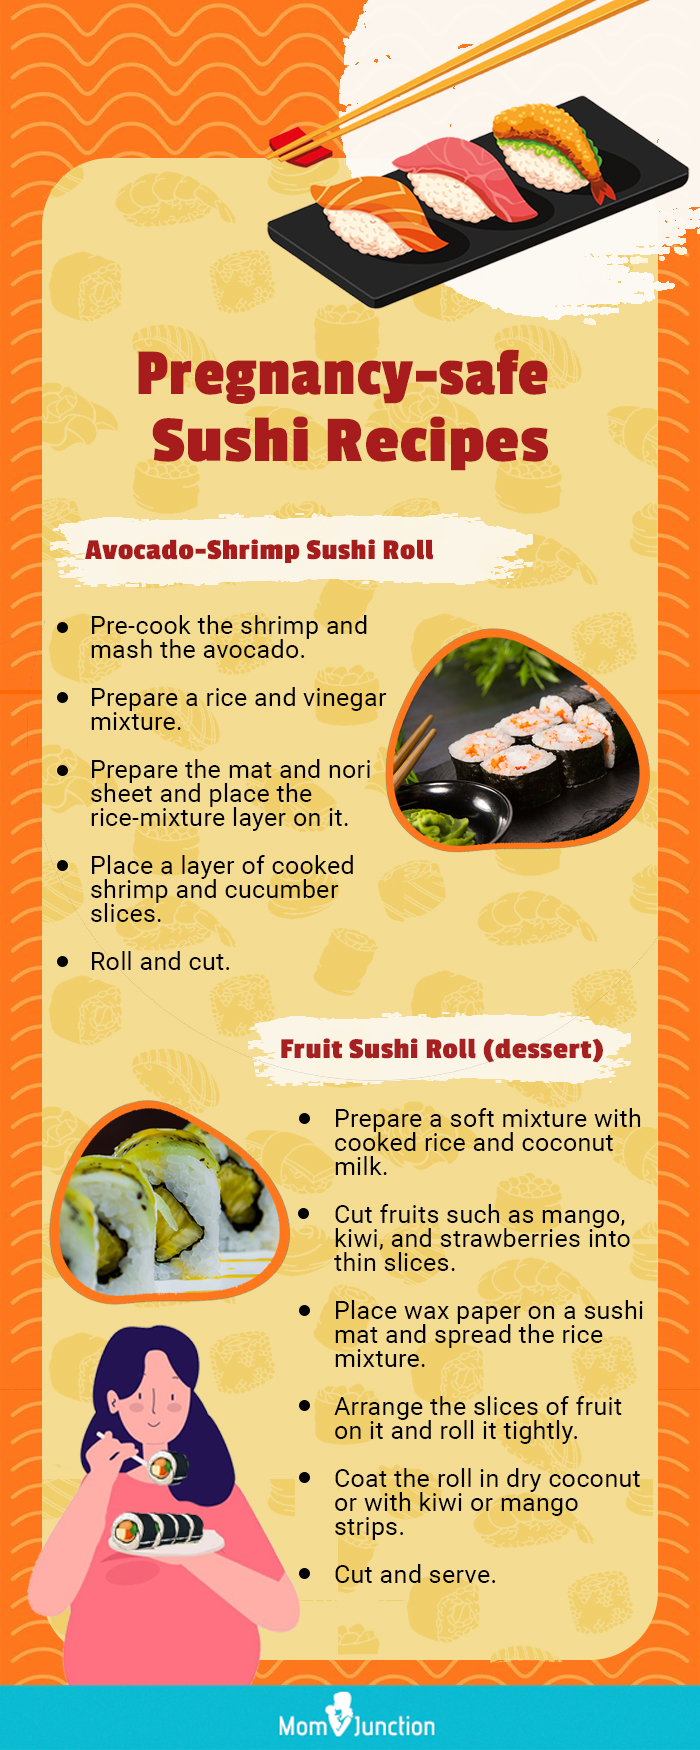 pregnancy safe sushi recipes (infographic)